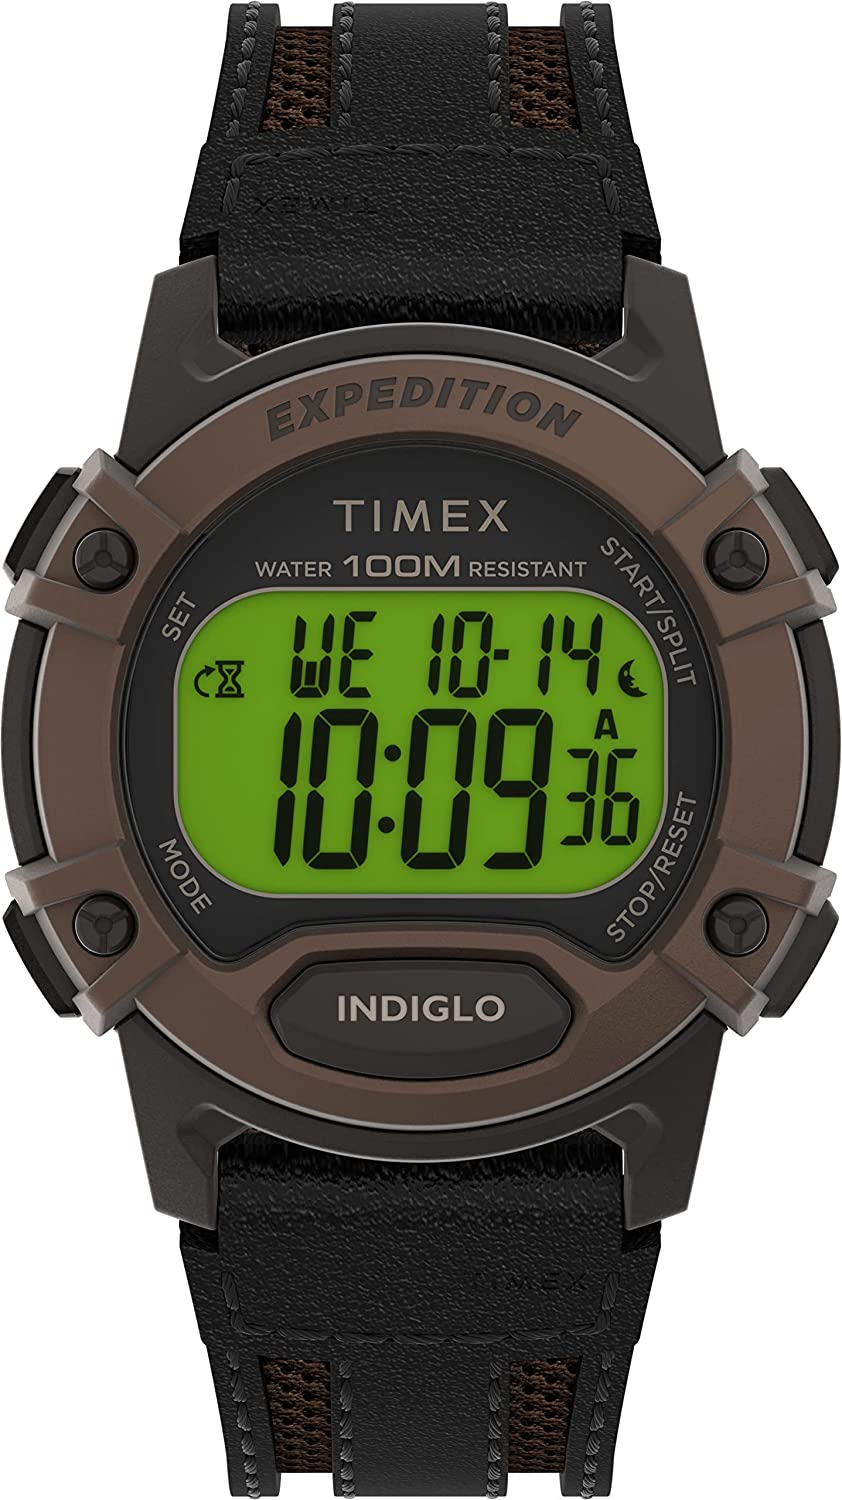   Timex Expedition TW4B24600  